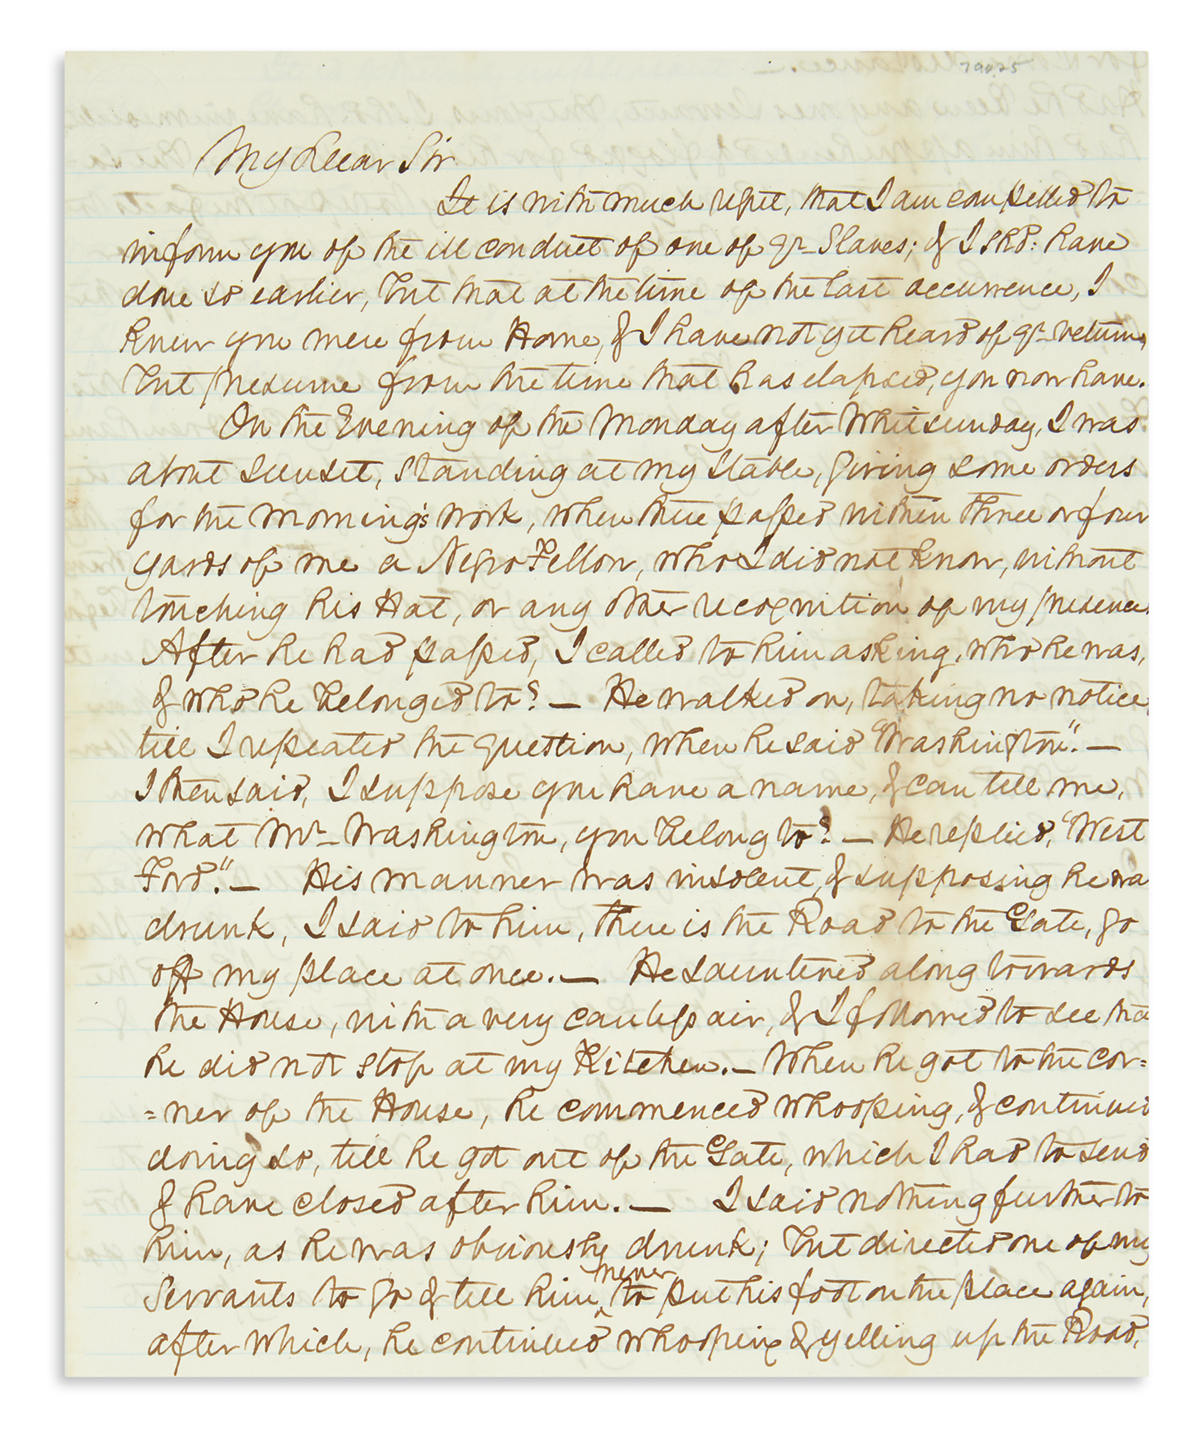 (SLAVERY AND ABOLITION.) Archive of letters to John Augustine Washington III at Mount Vernon, many discussing enslaved people.